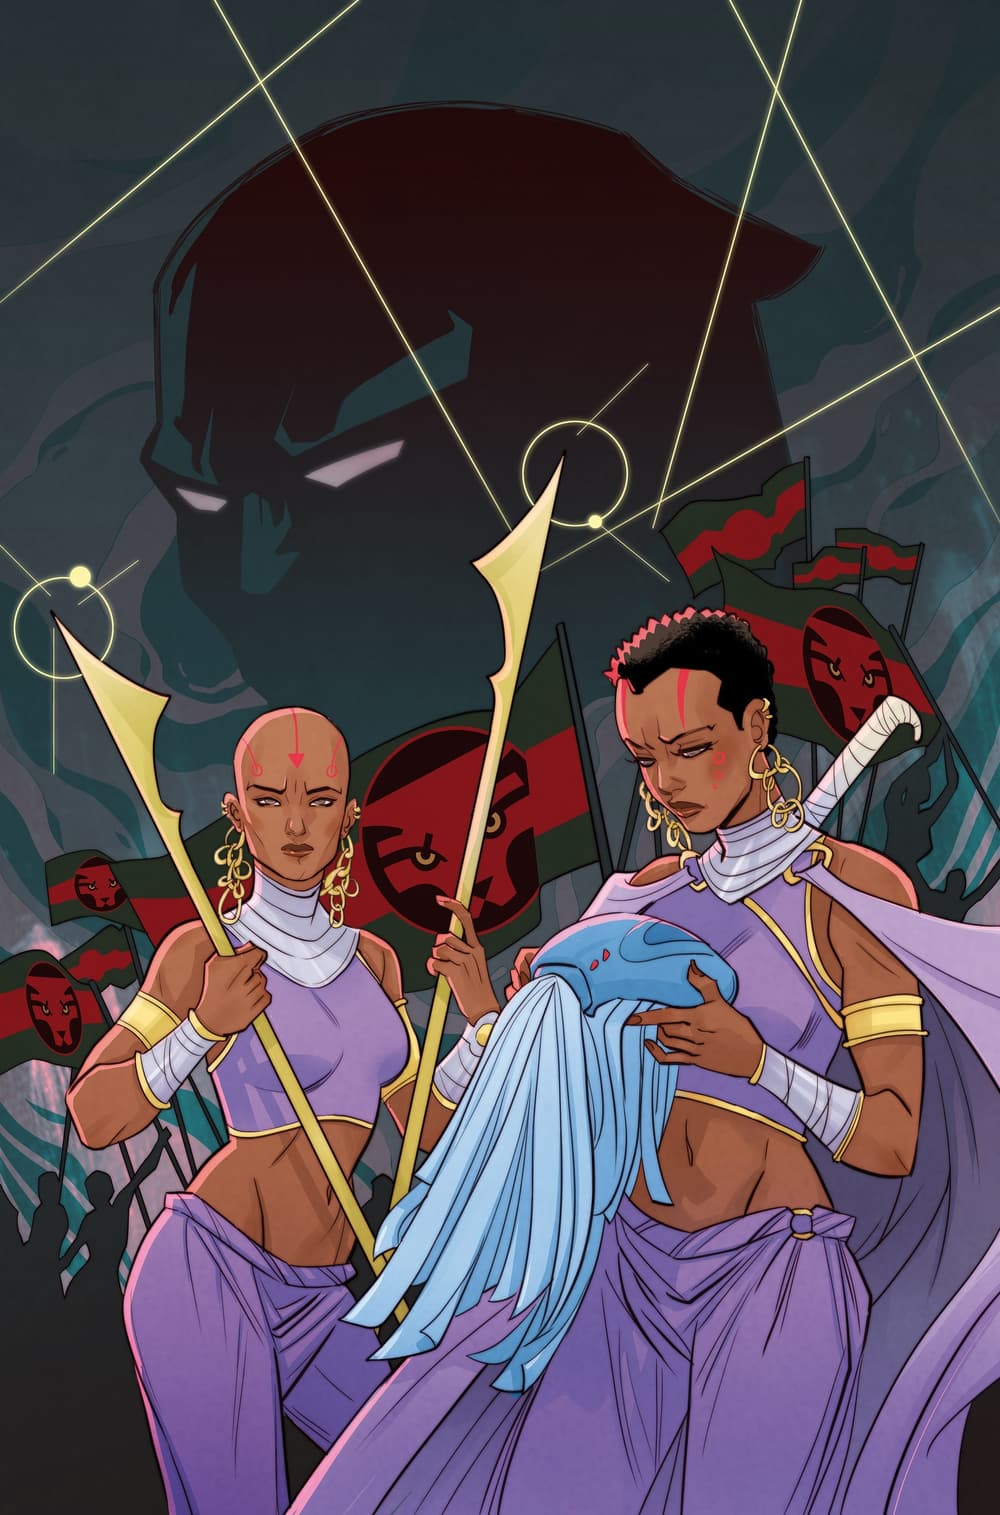 Variant Cover to BLACK PANTHER: WORLD OF WAKANDA (2016) #2 by artist Marguerite Sauvage.